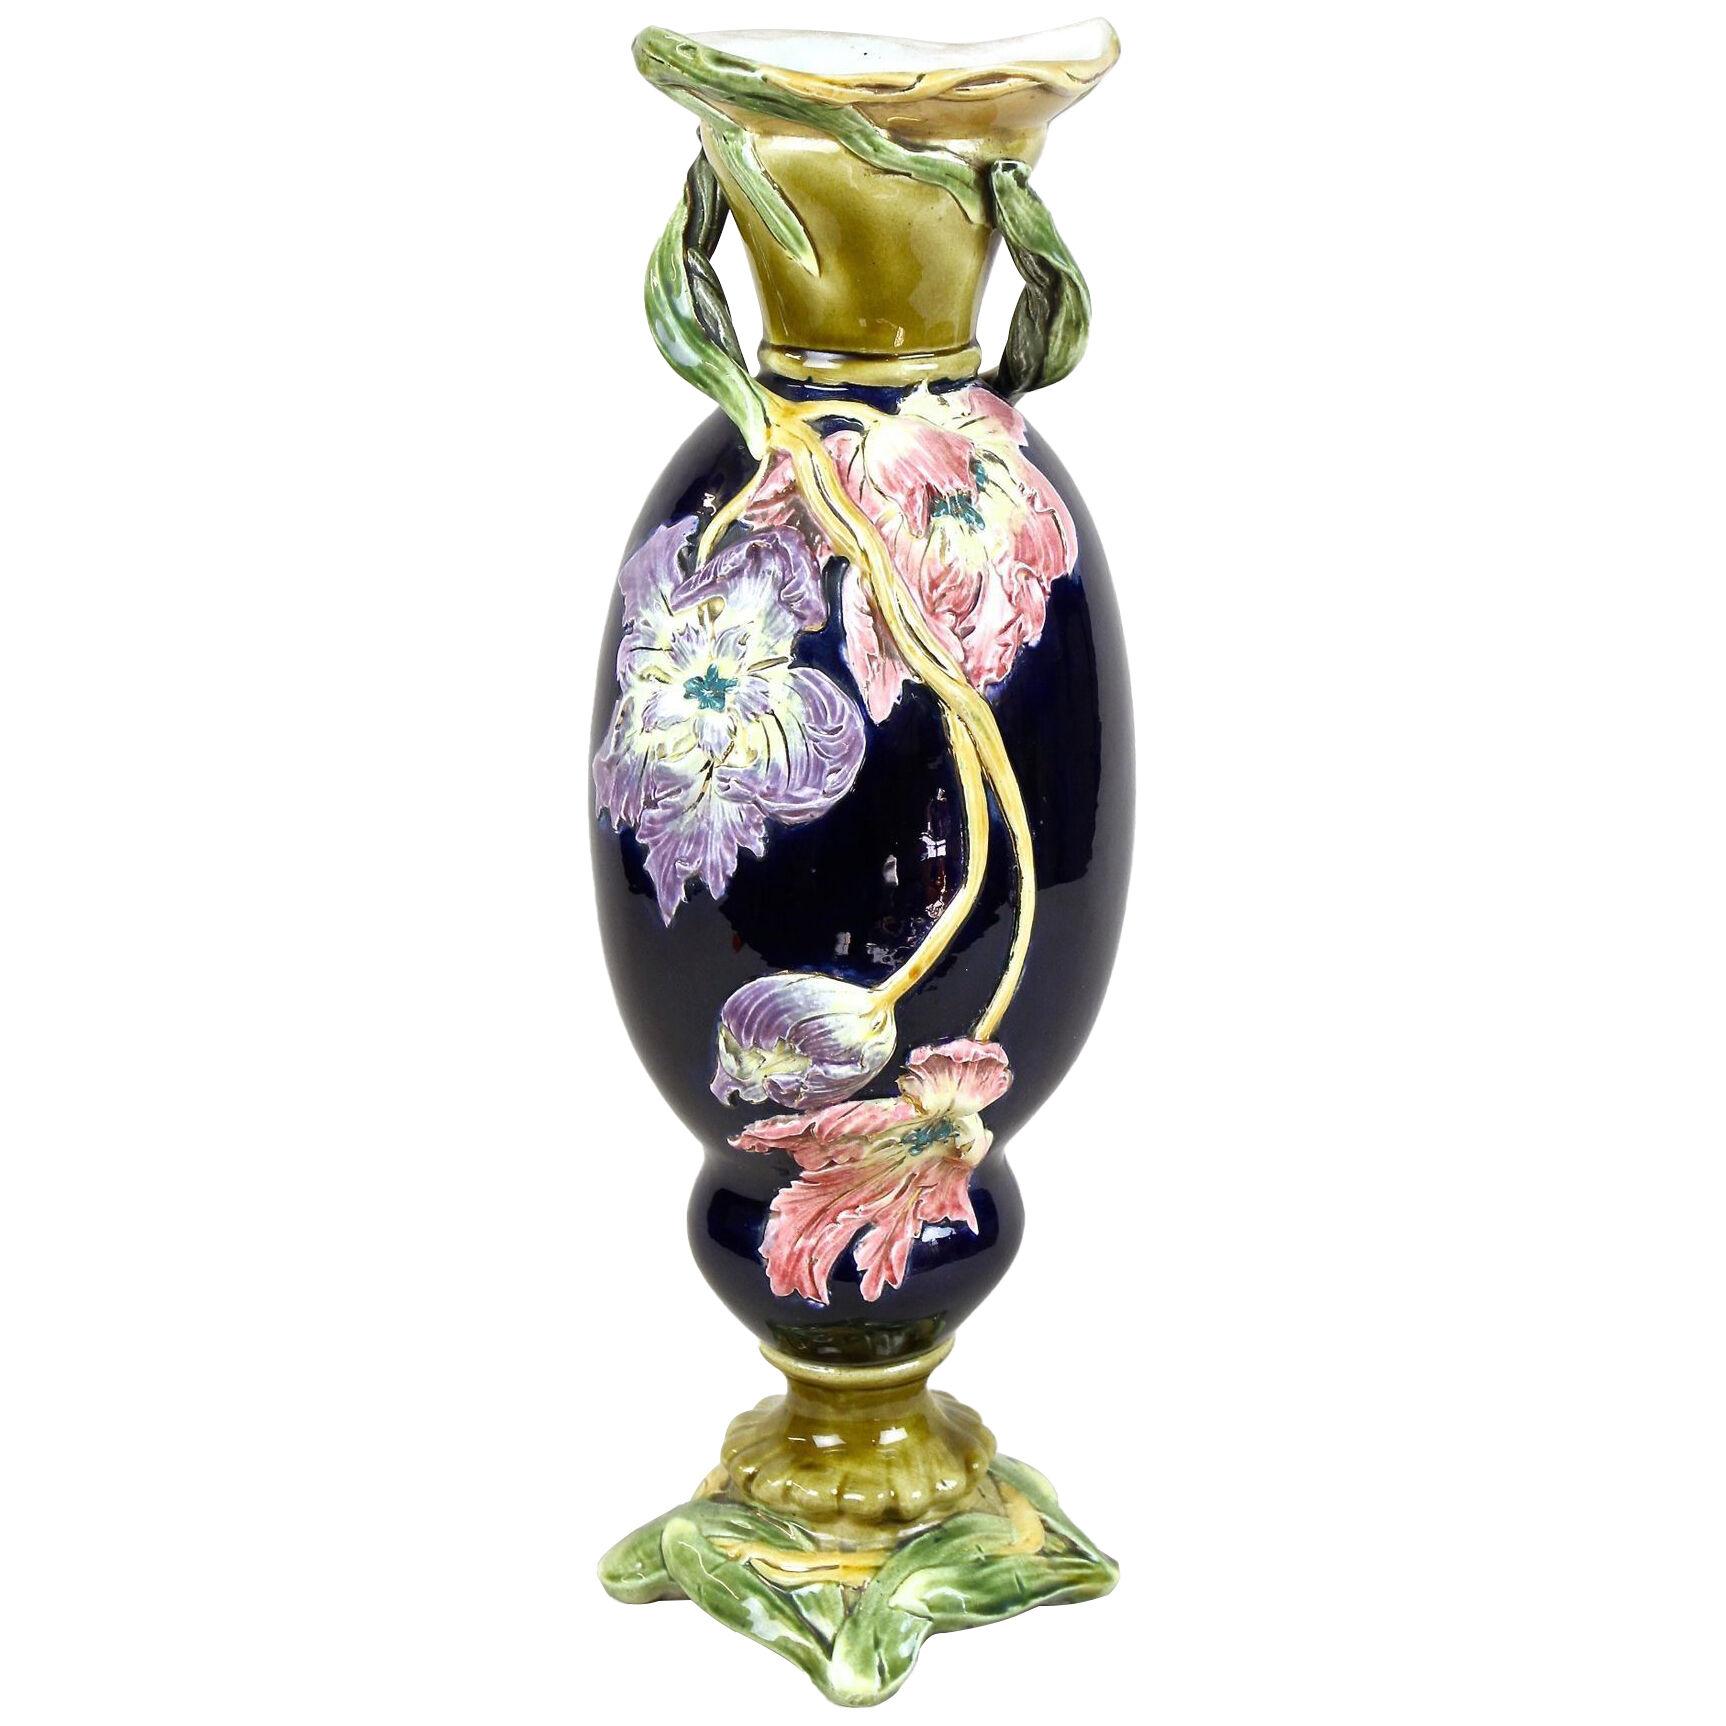 French Art Nouveau Majolica Vase With Floral Design, France circa 1900